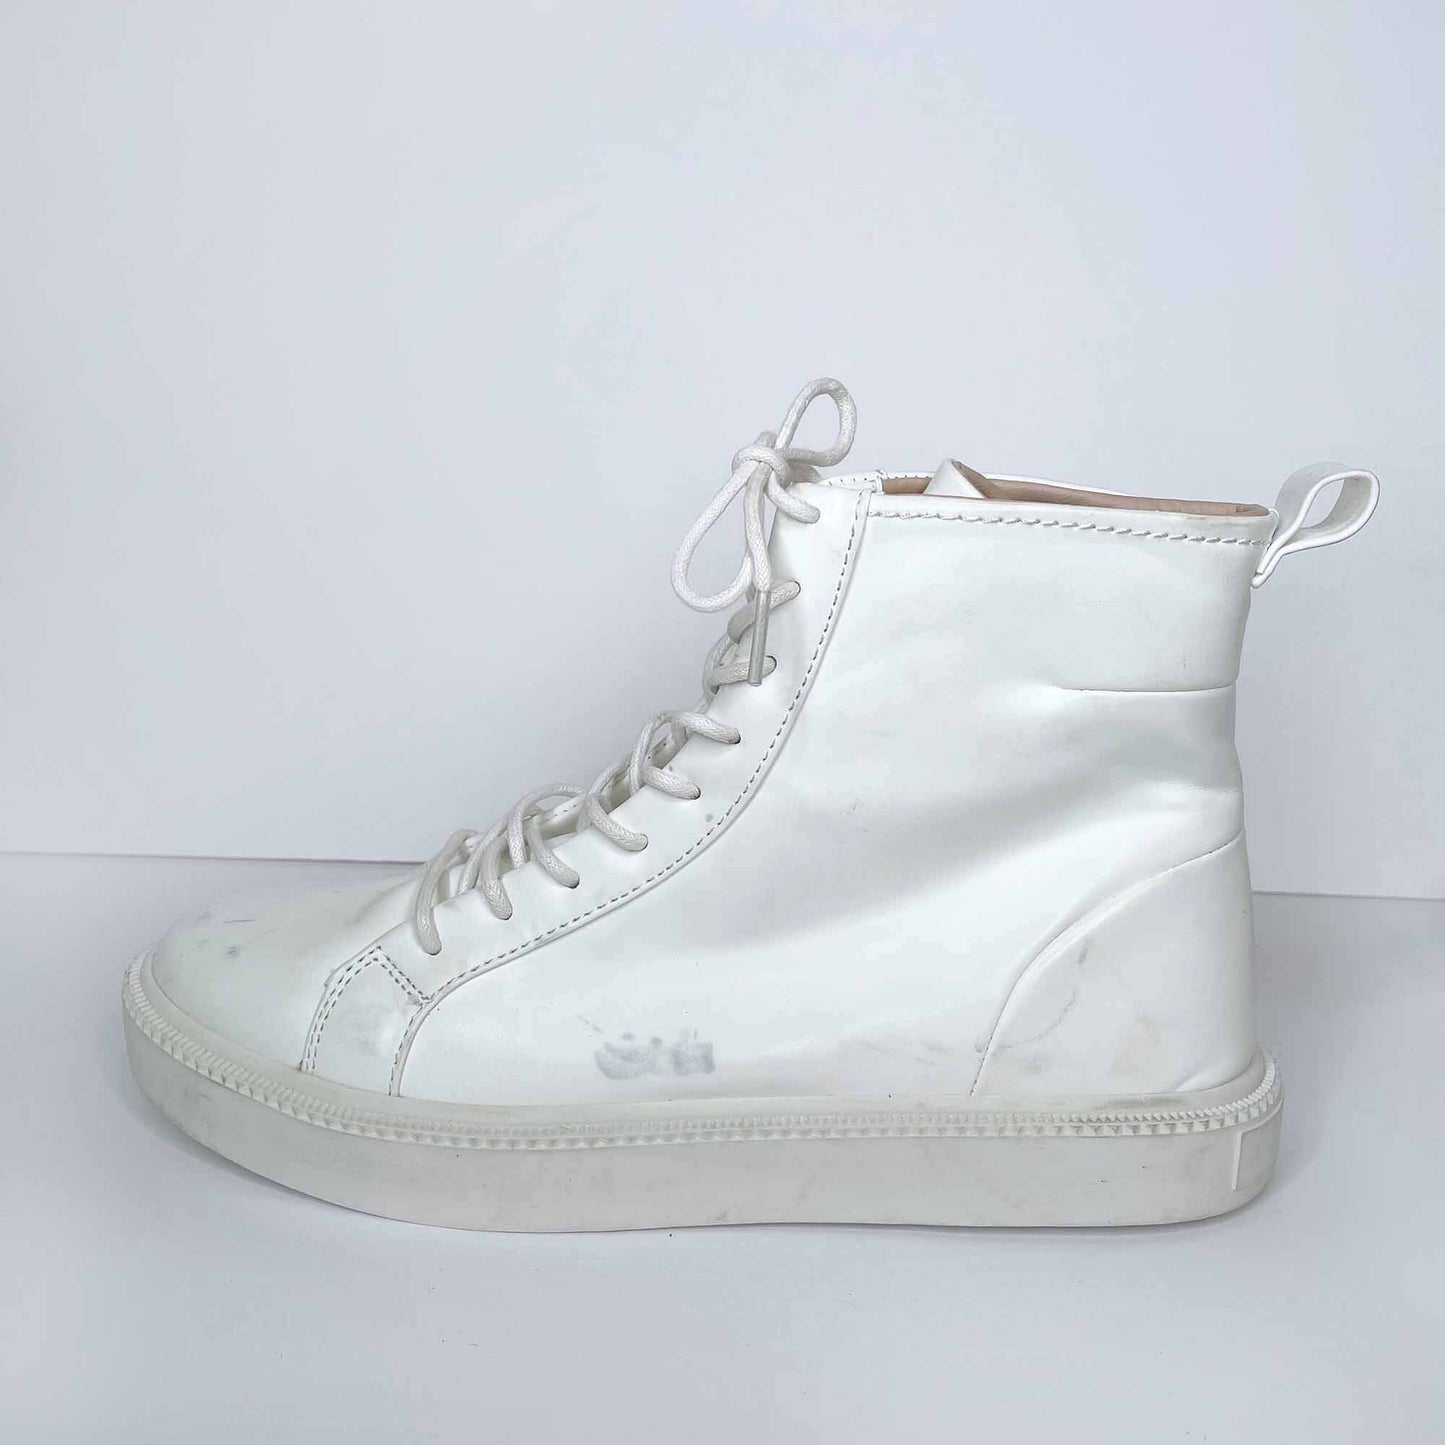 zara white leather high top sneakers - size 41